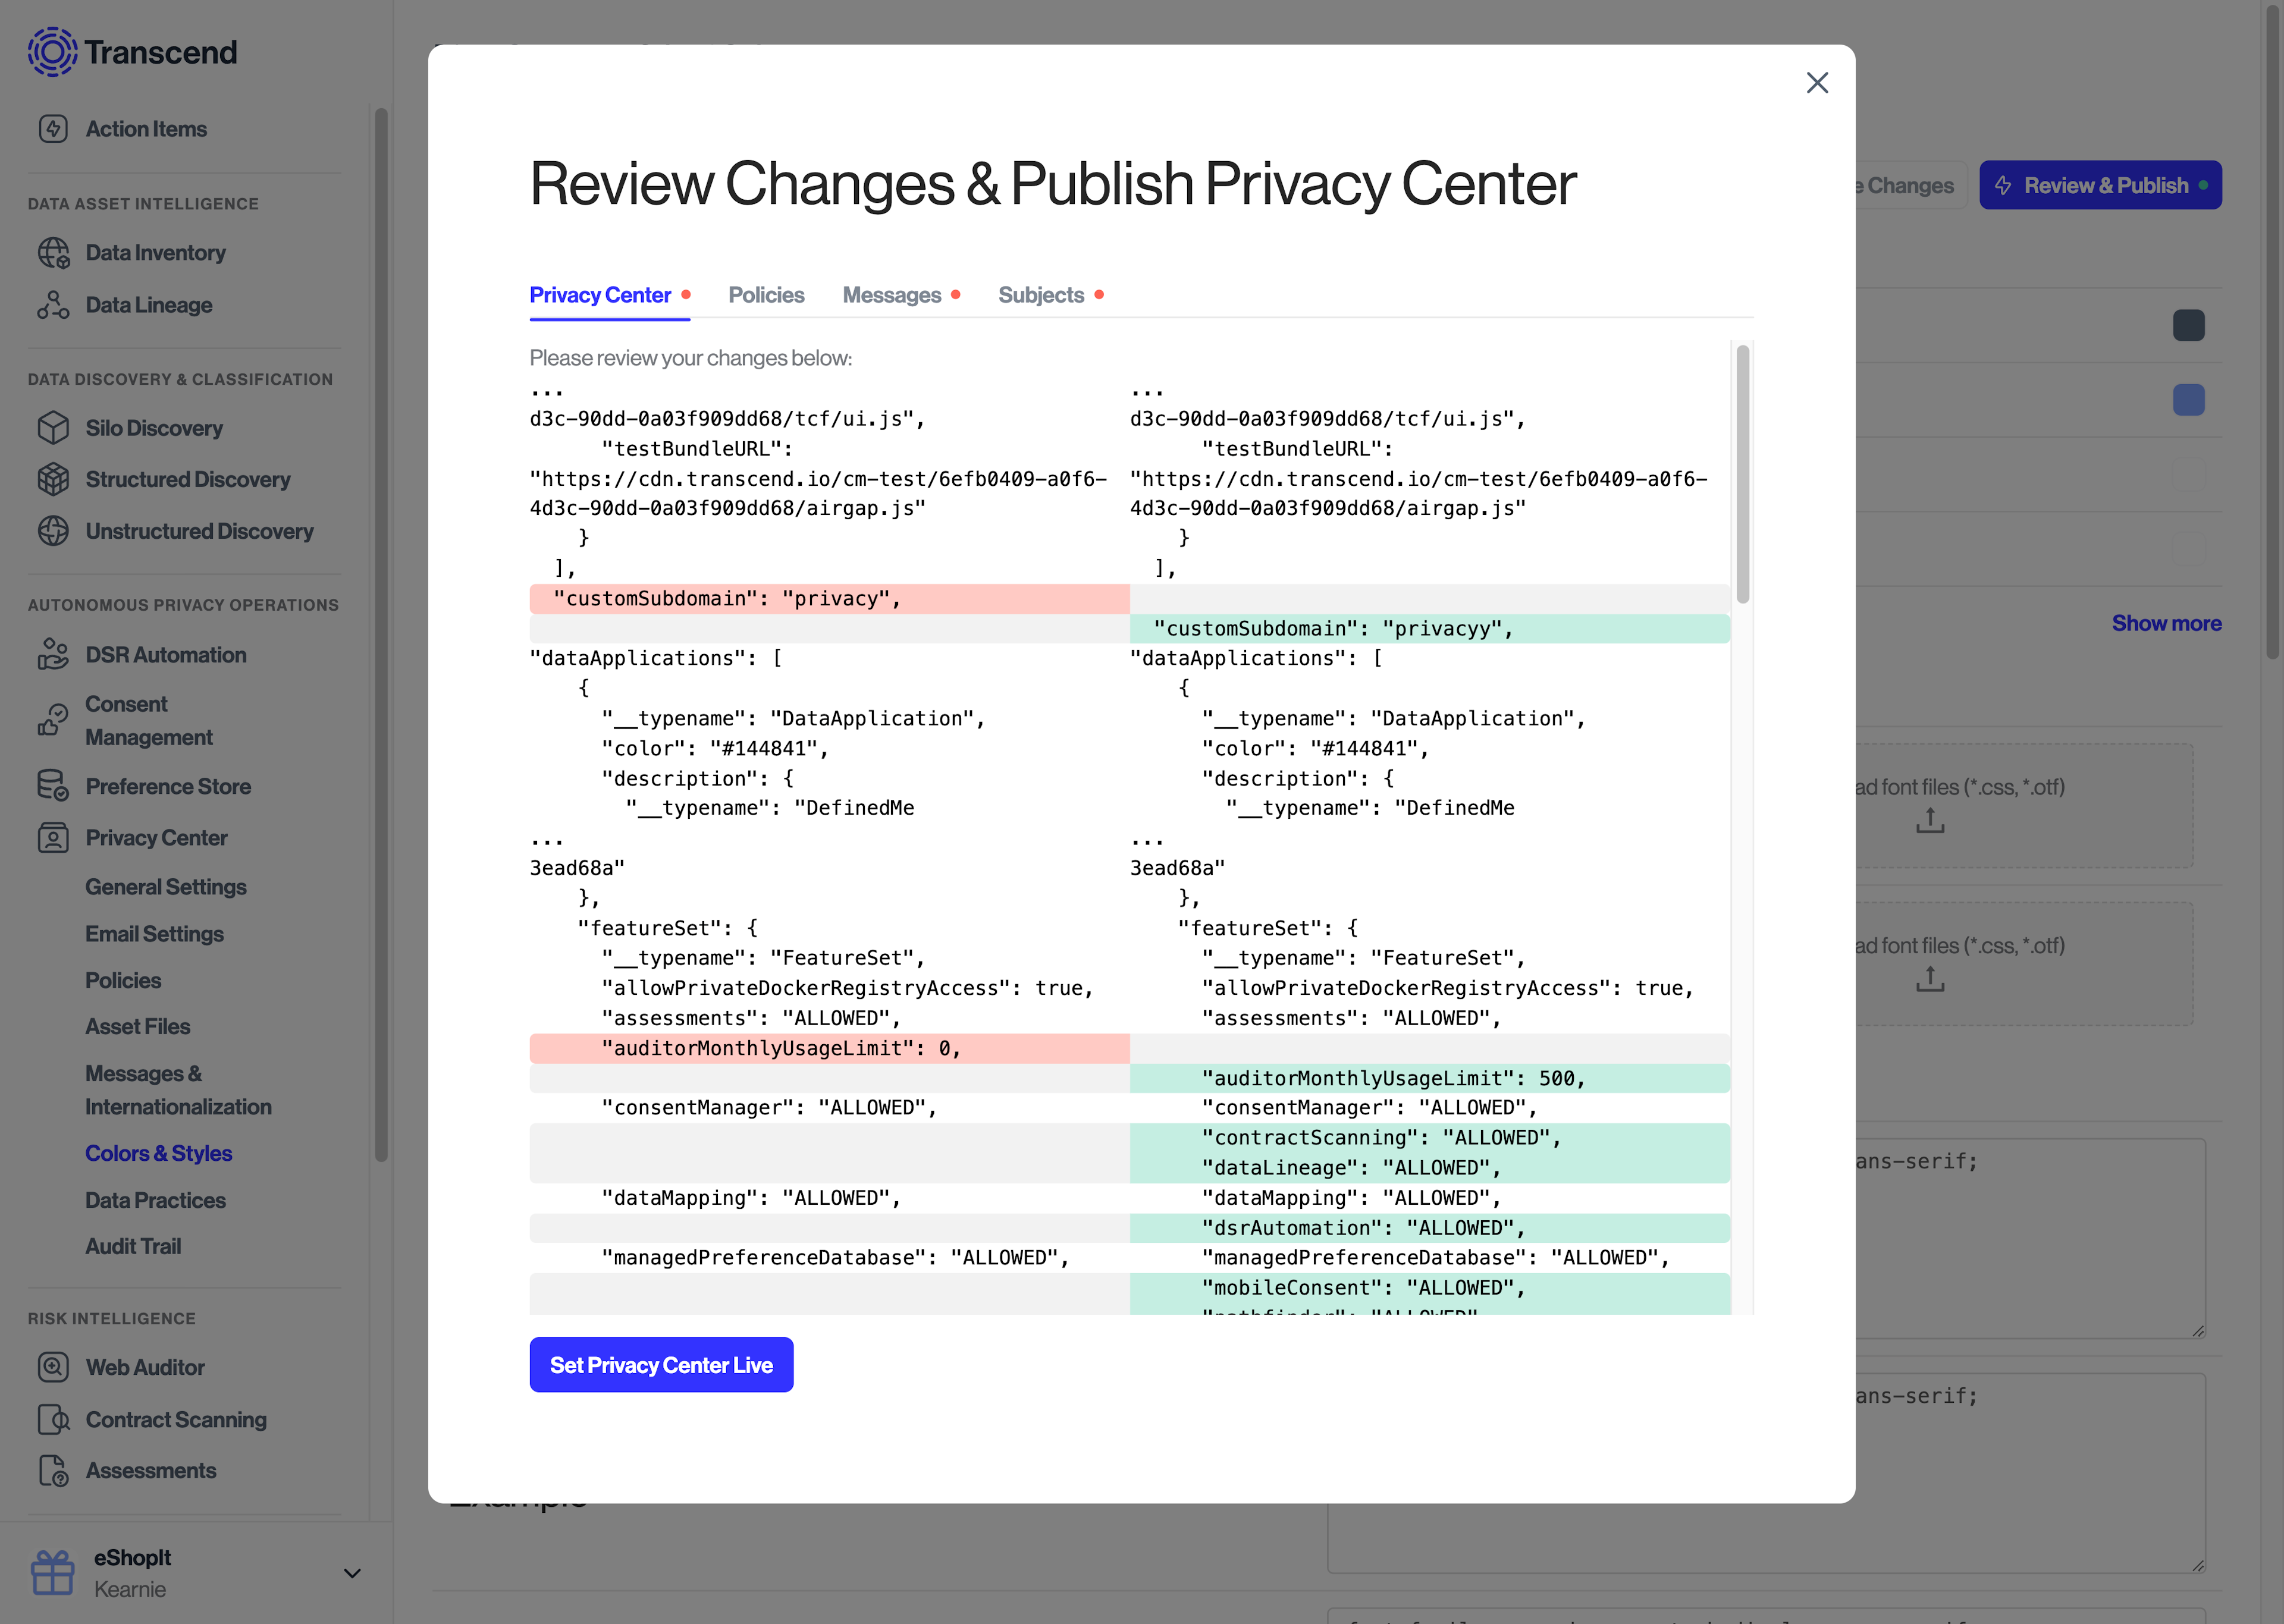 The Review Changes & Publish Privacy Center modal that shows you all the detected changes made to your Privacy Center so far such that they can be inspected and then deployed live officially